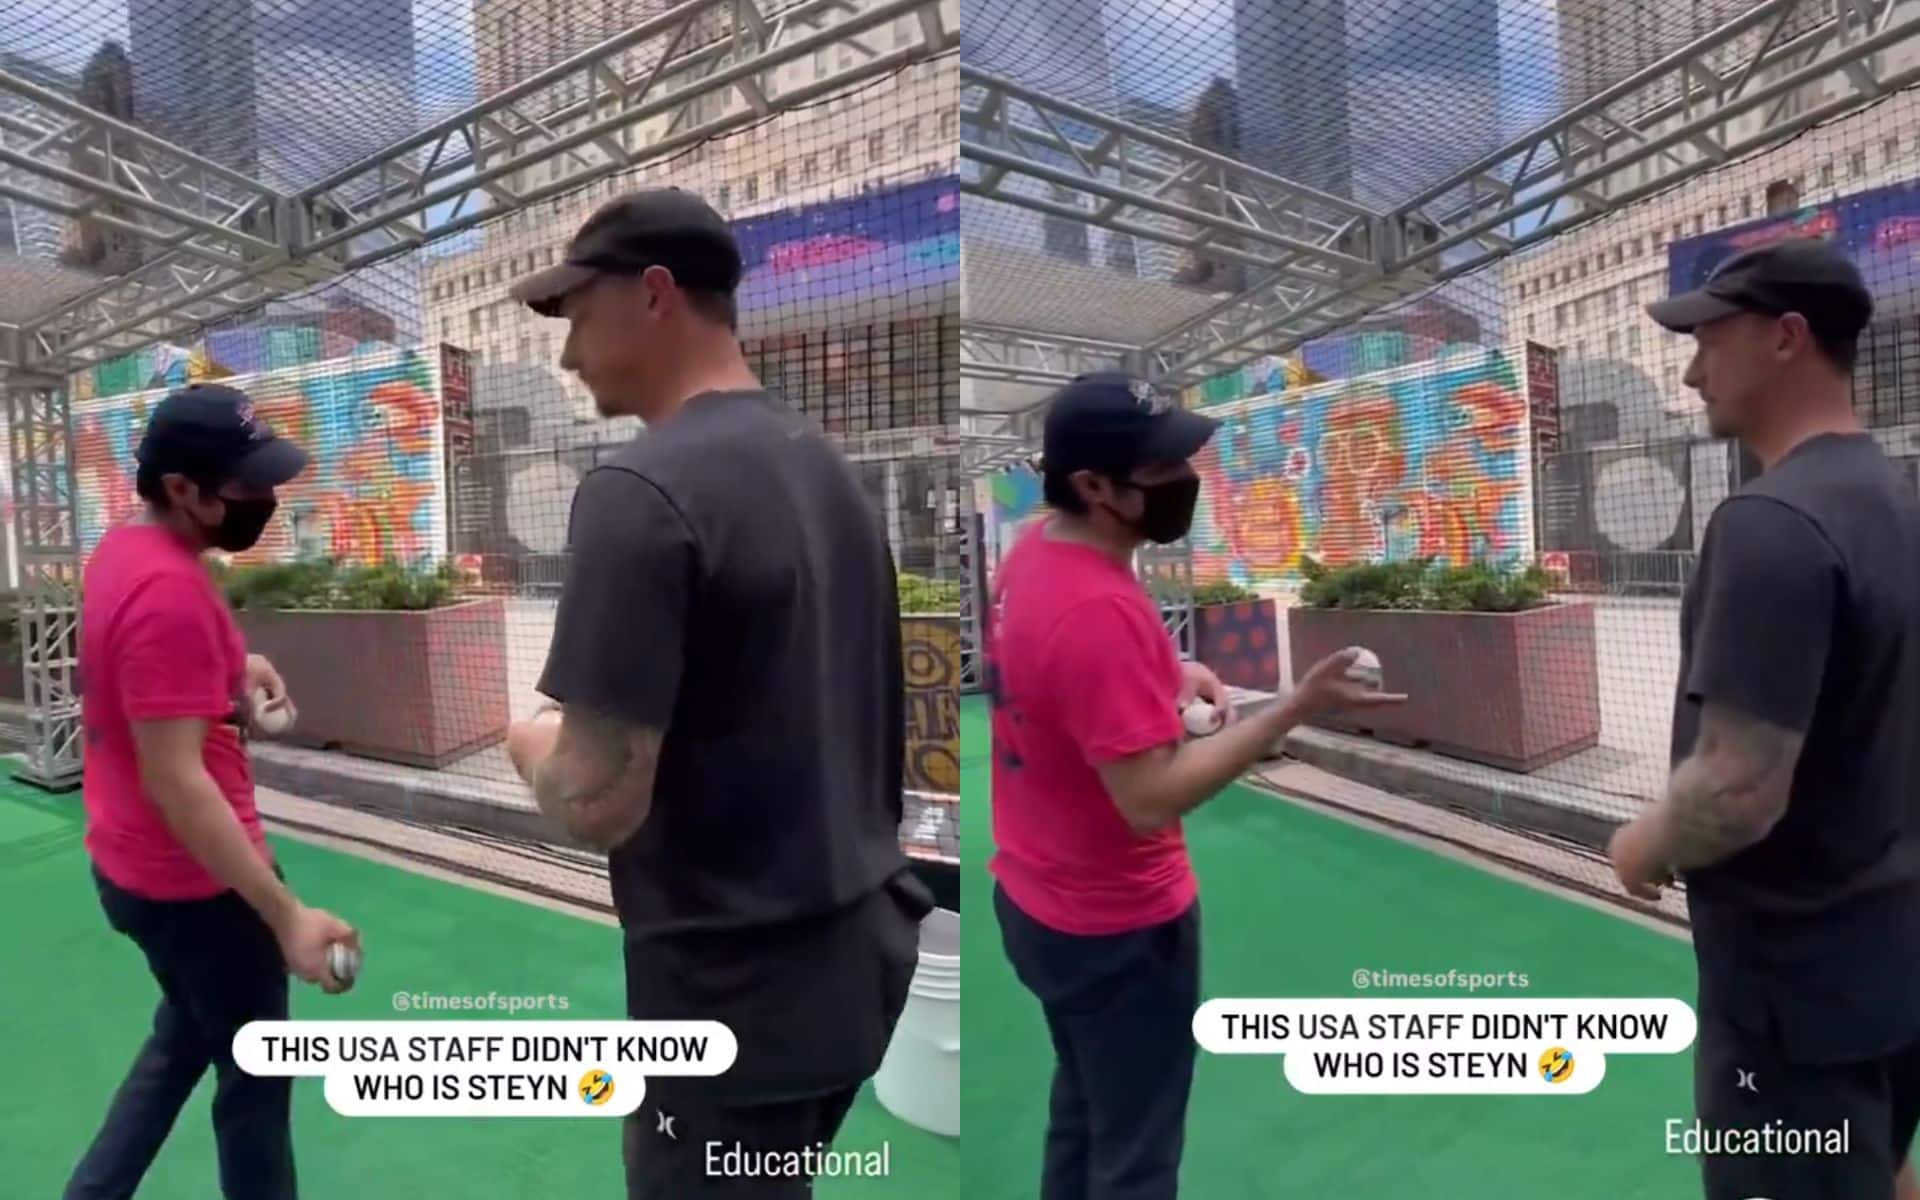 Dale Steyn getting tips from a staff member in USA (x.com)